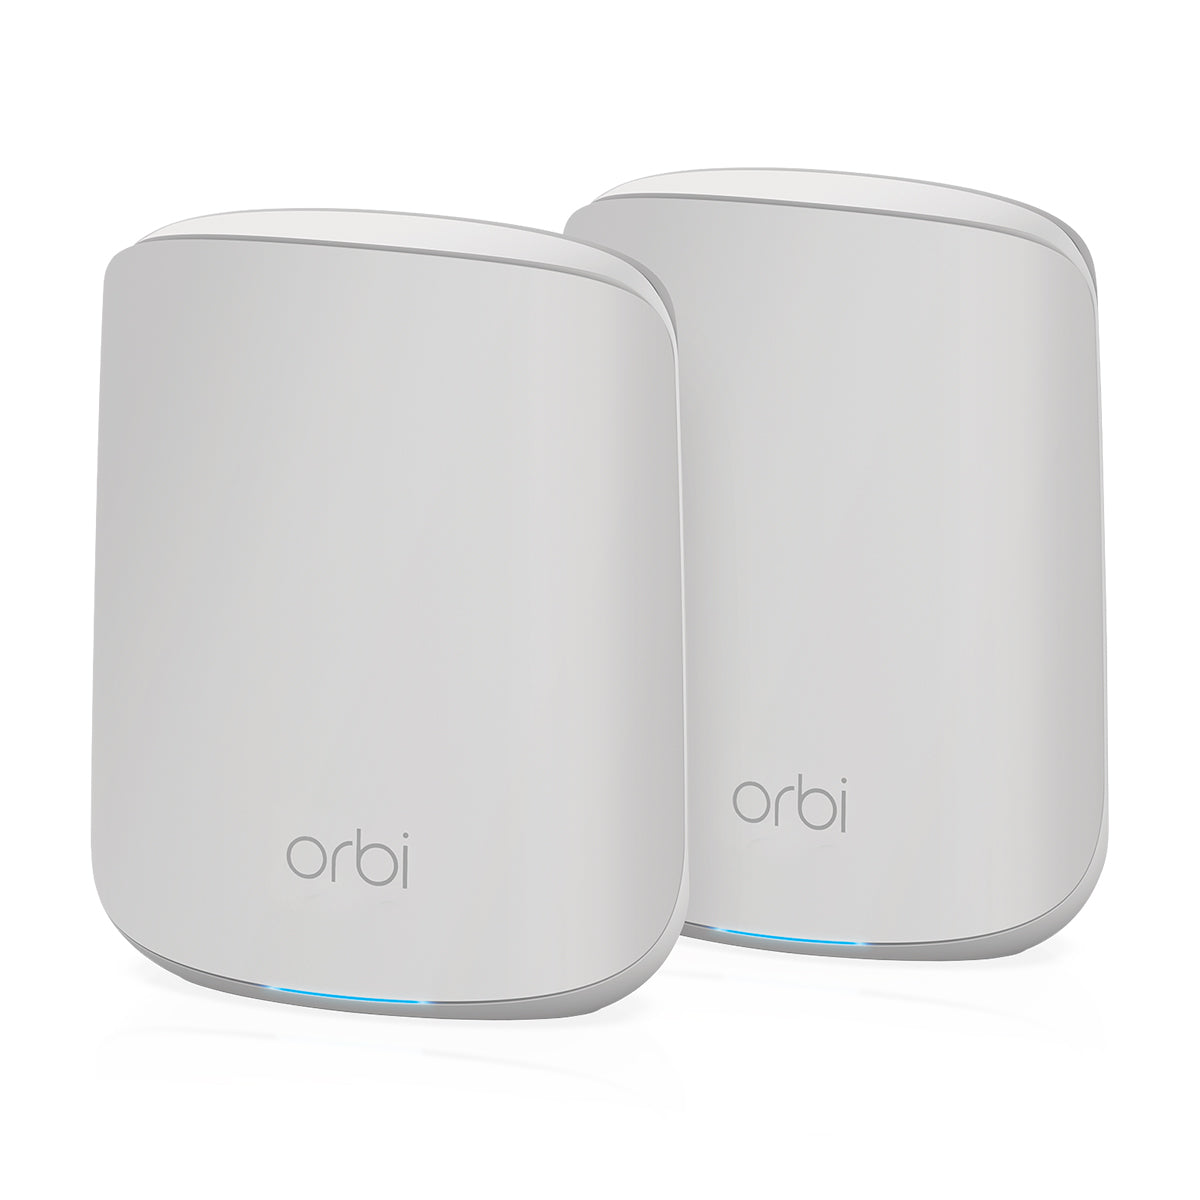 NETGEAR Orbi RBK352 - Wi-Fi System (router, extender) - up to 2150 square feet - networking - GigE - 802.11a/b/g/n/ac/ax - Dual Band